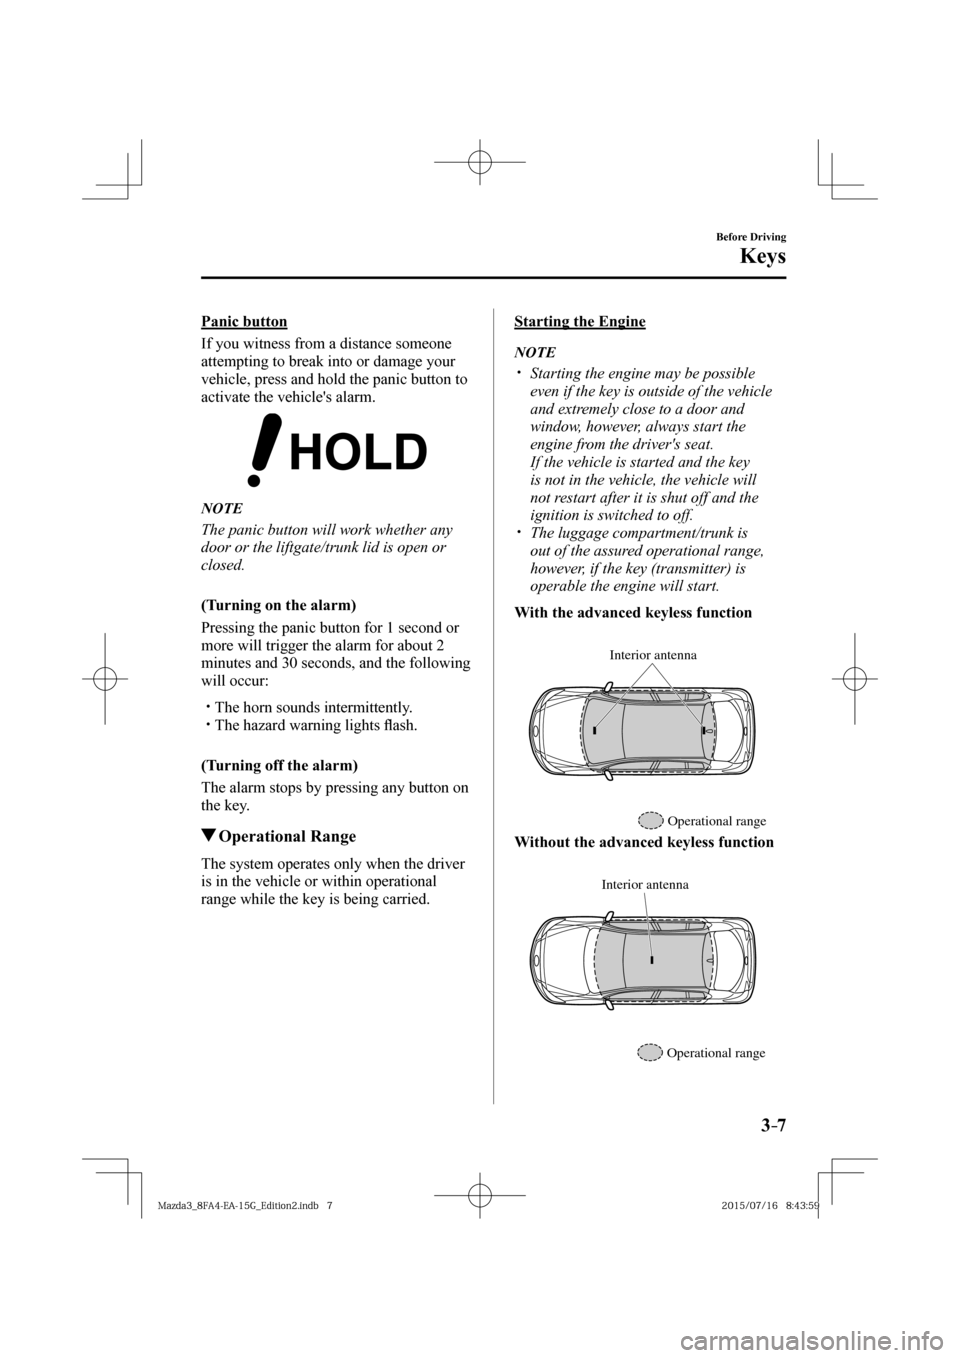 MAZDA MODEL 3 HATCHBACK 2016  Owners Manual (in English) 3–7
Before Driving
Keys
  Panic  button
    If you witness from a distance someone 
attempting to break into or damage your 
vehicle, press and hold the panic button to 
activate the vehicles alarm